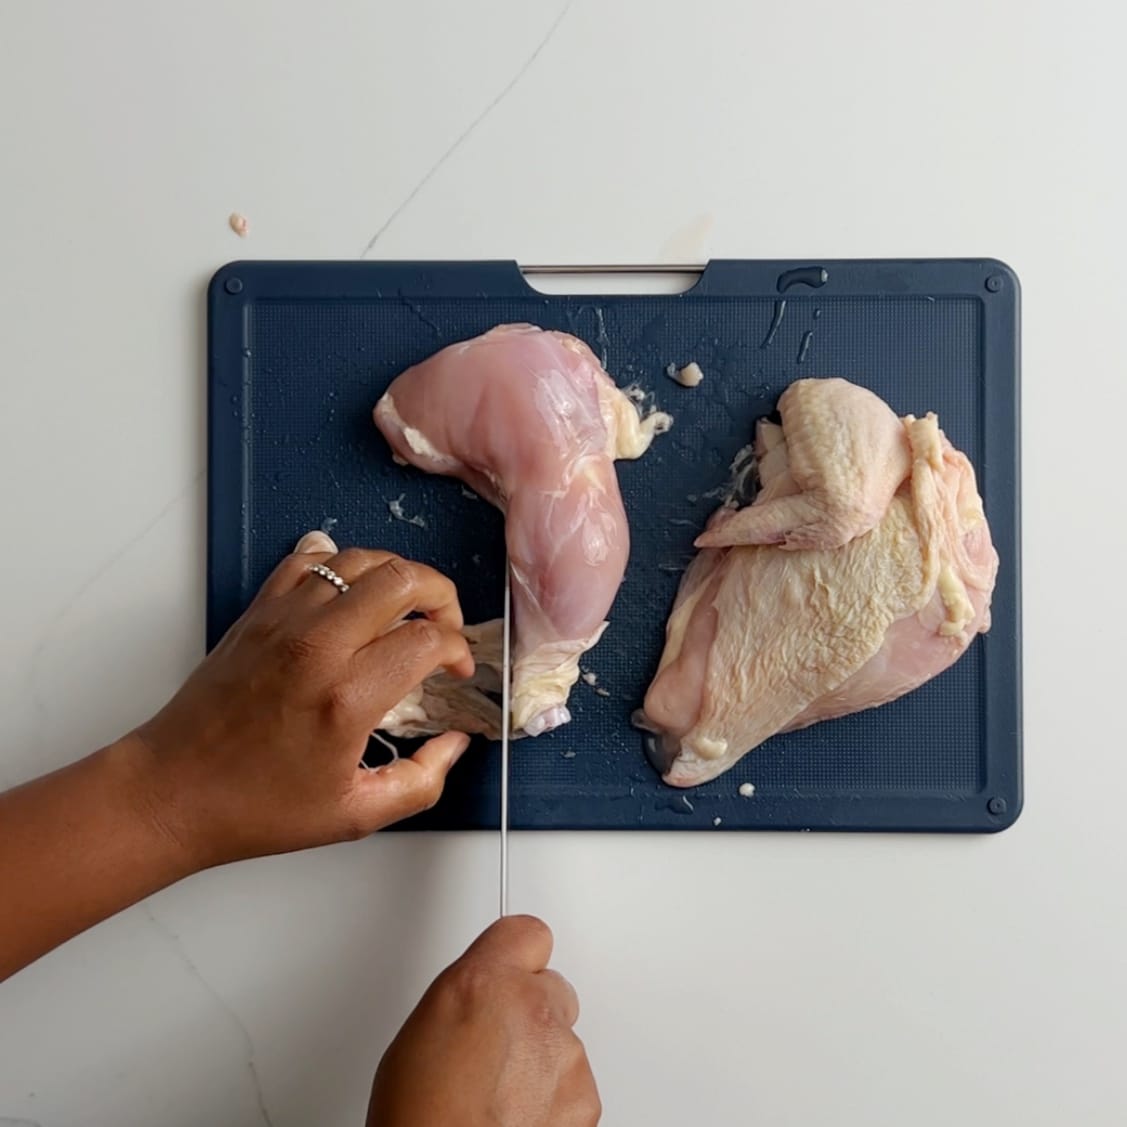 Removing the skin from chicken thigh on a blue cutting board.